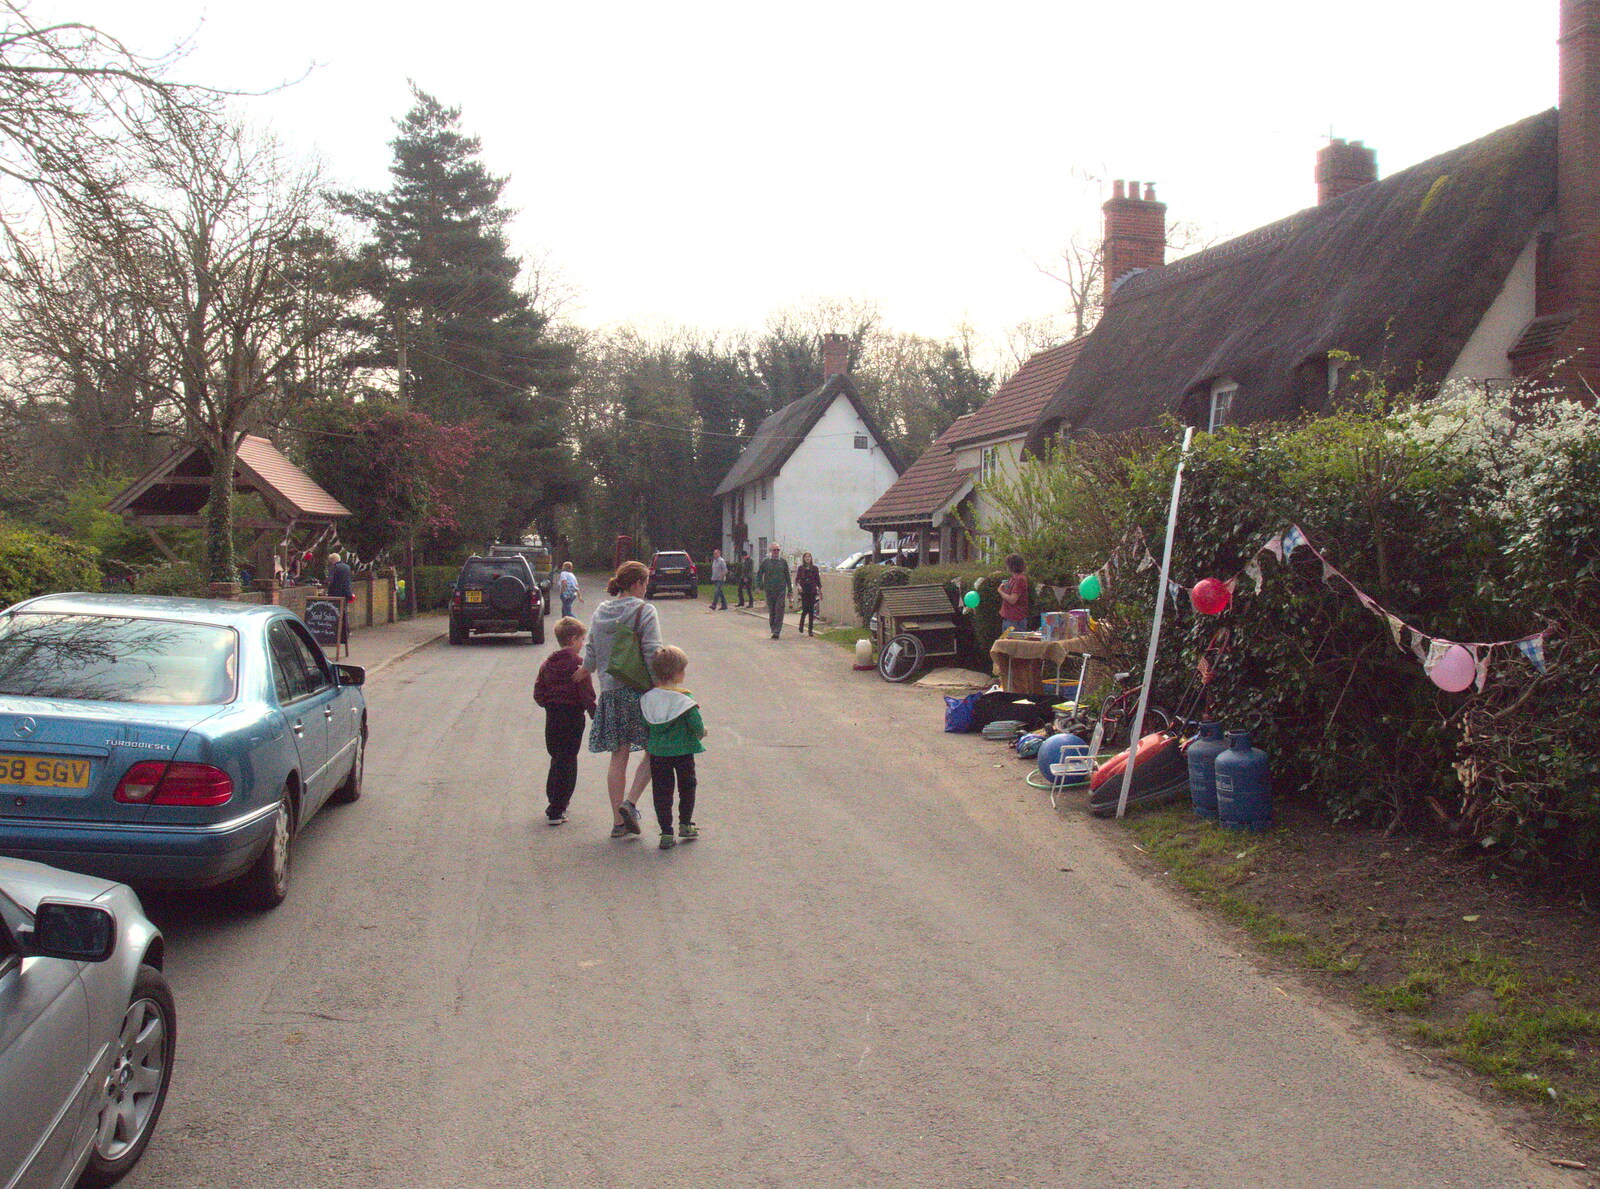 The gang roam The Street at Brome from Comedy Night, and a Village Yard Sale, Eye and Brome, Suffolk - 8th April 2017